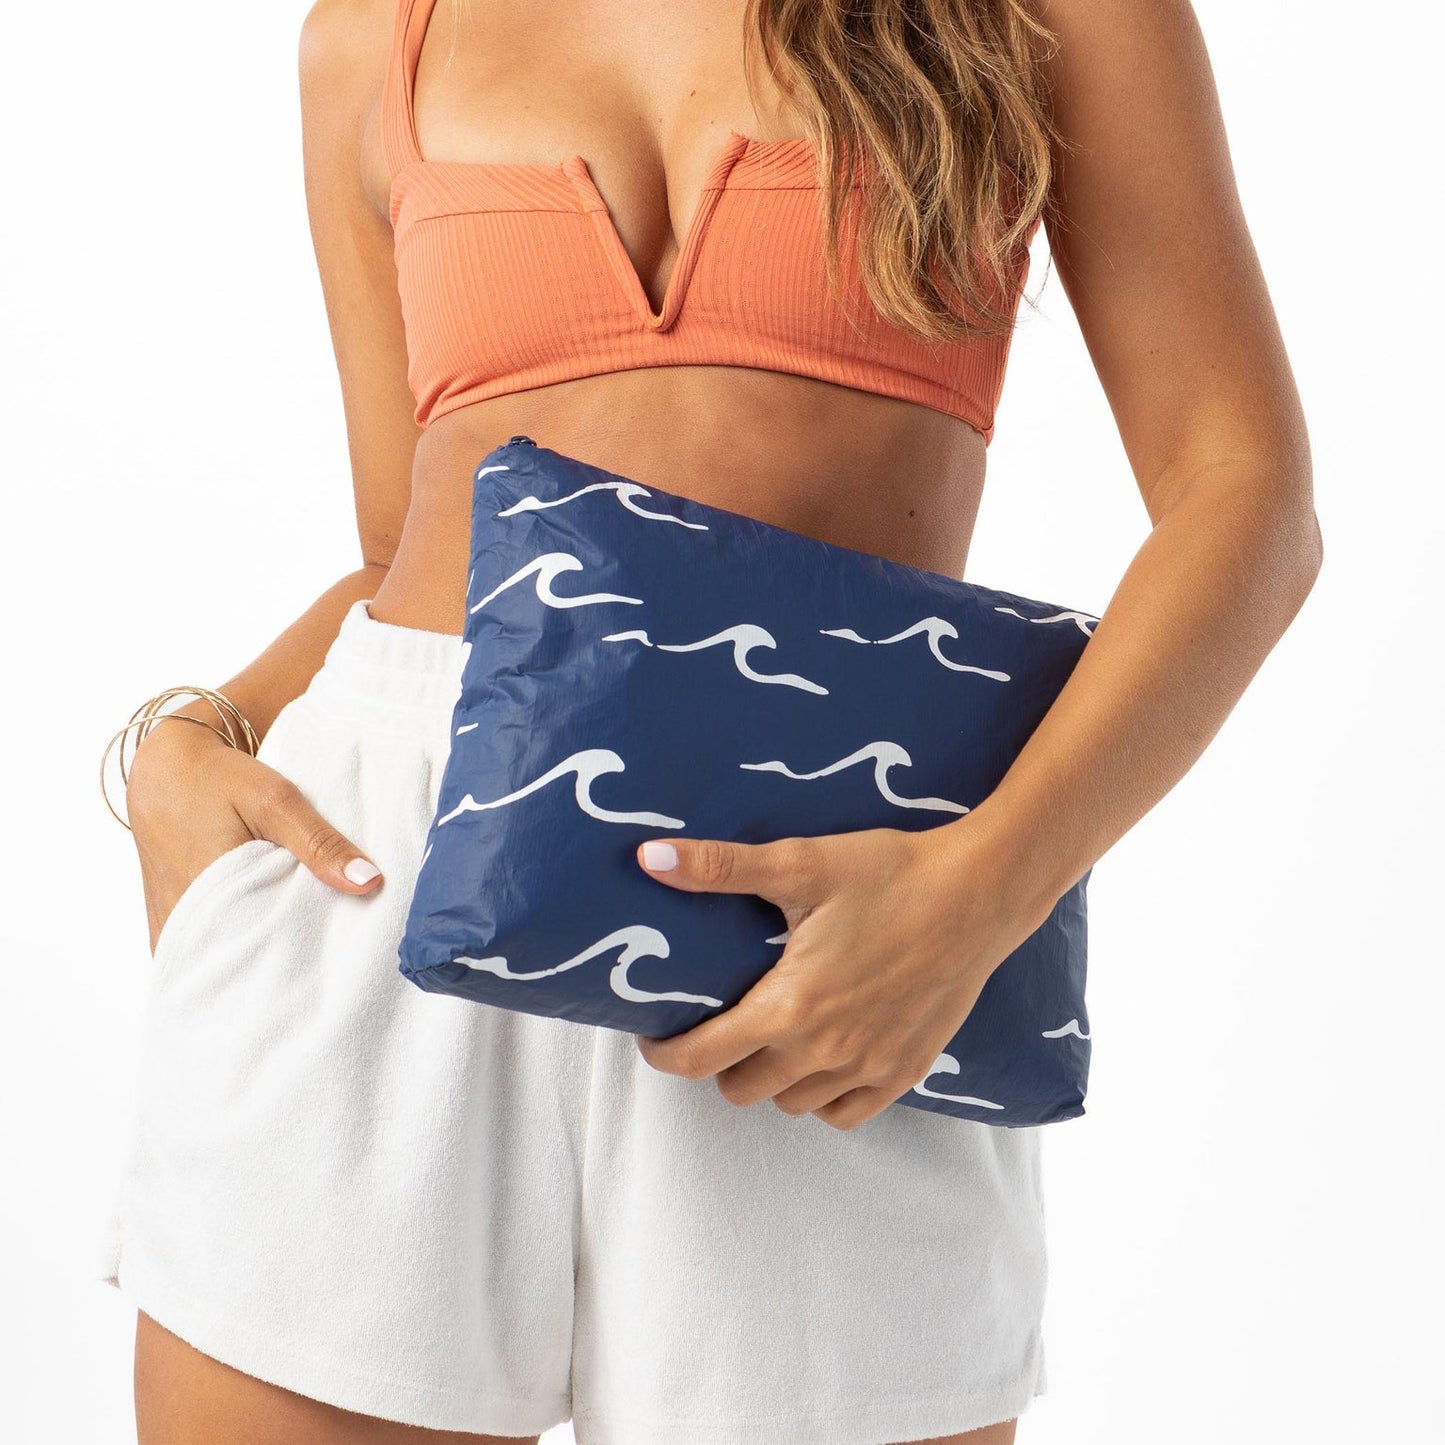 Mid Pouch - Seaside - Navy